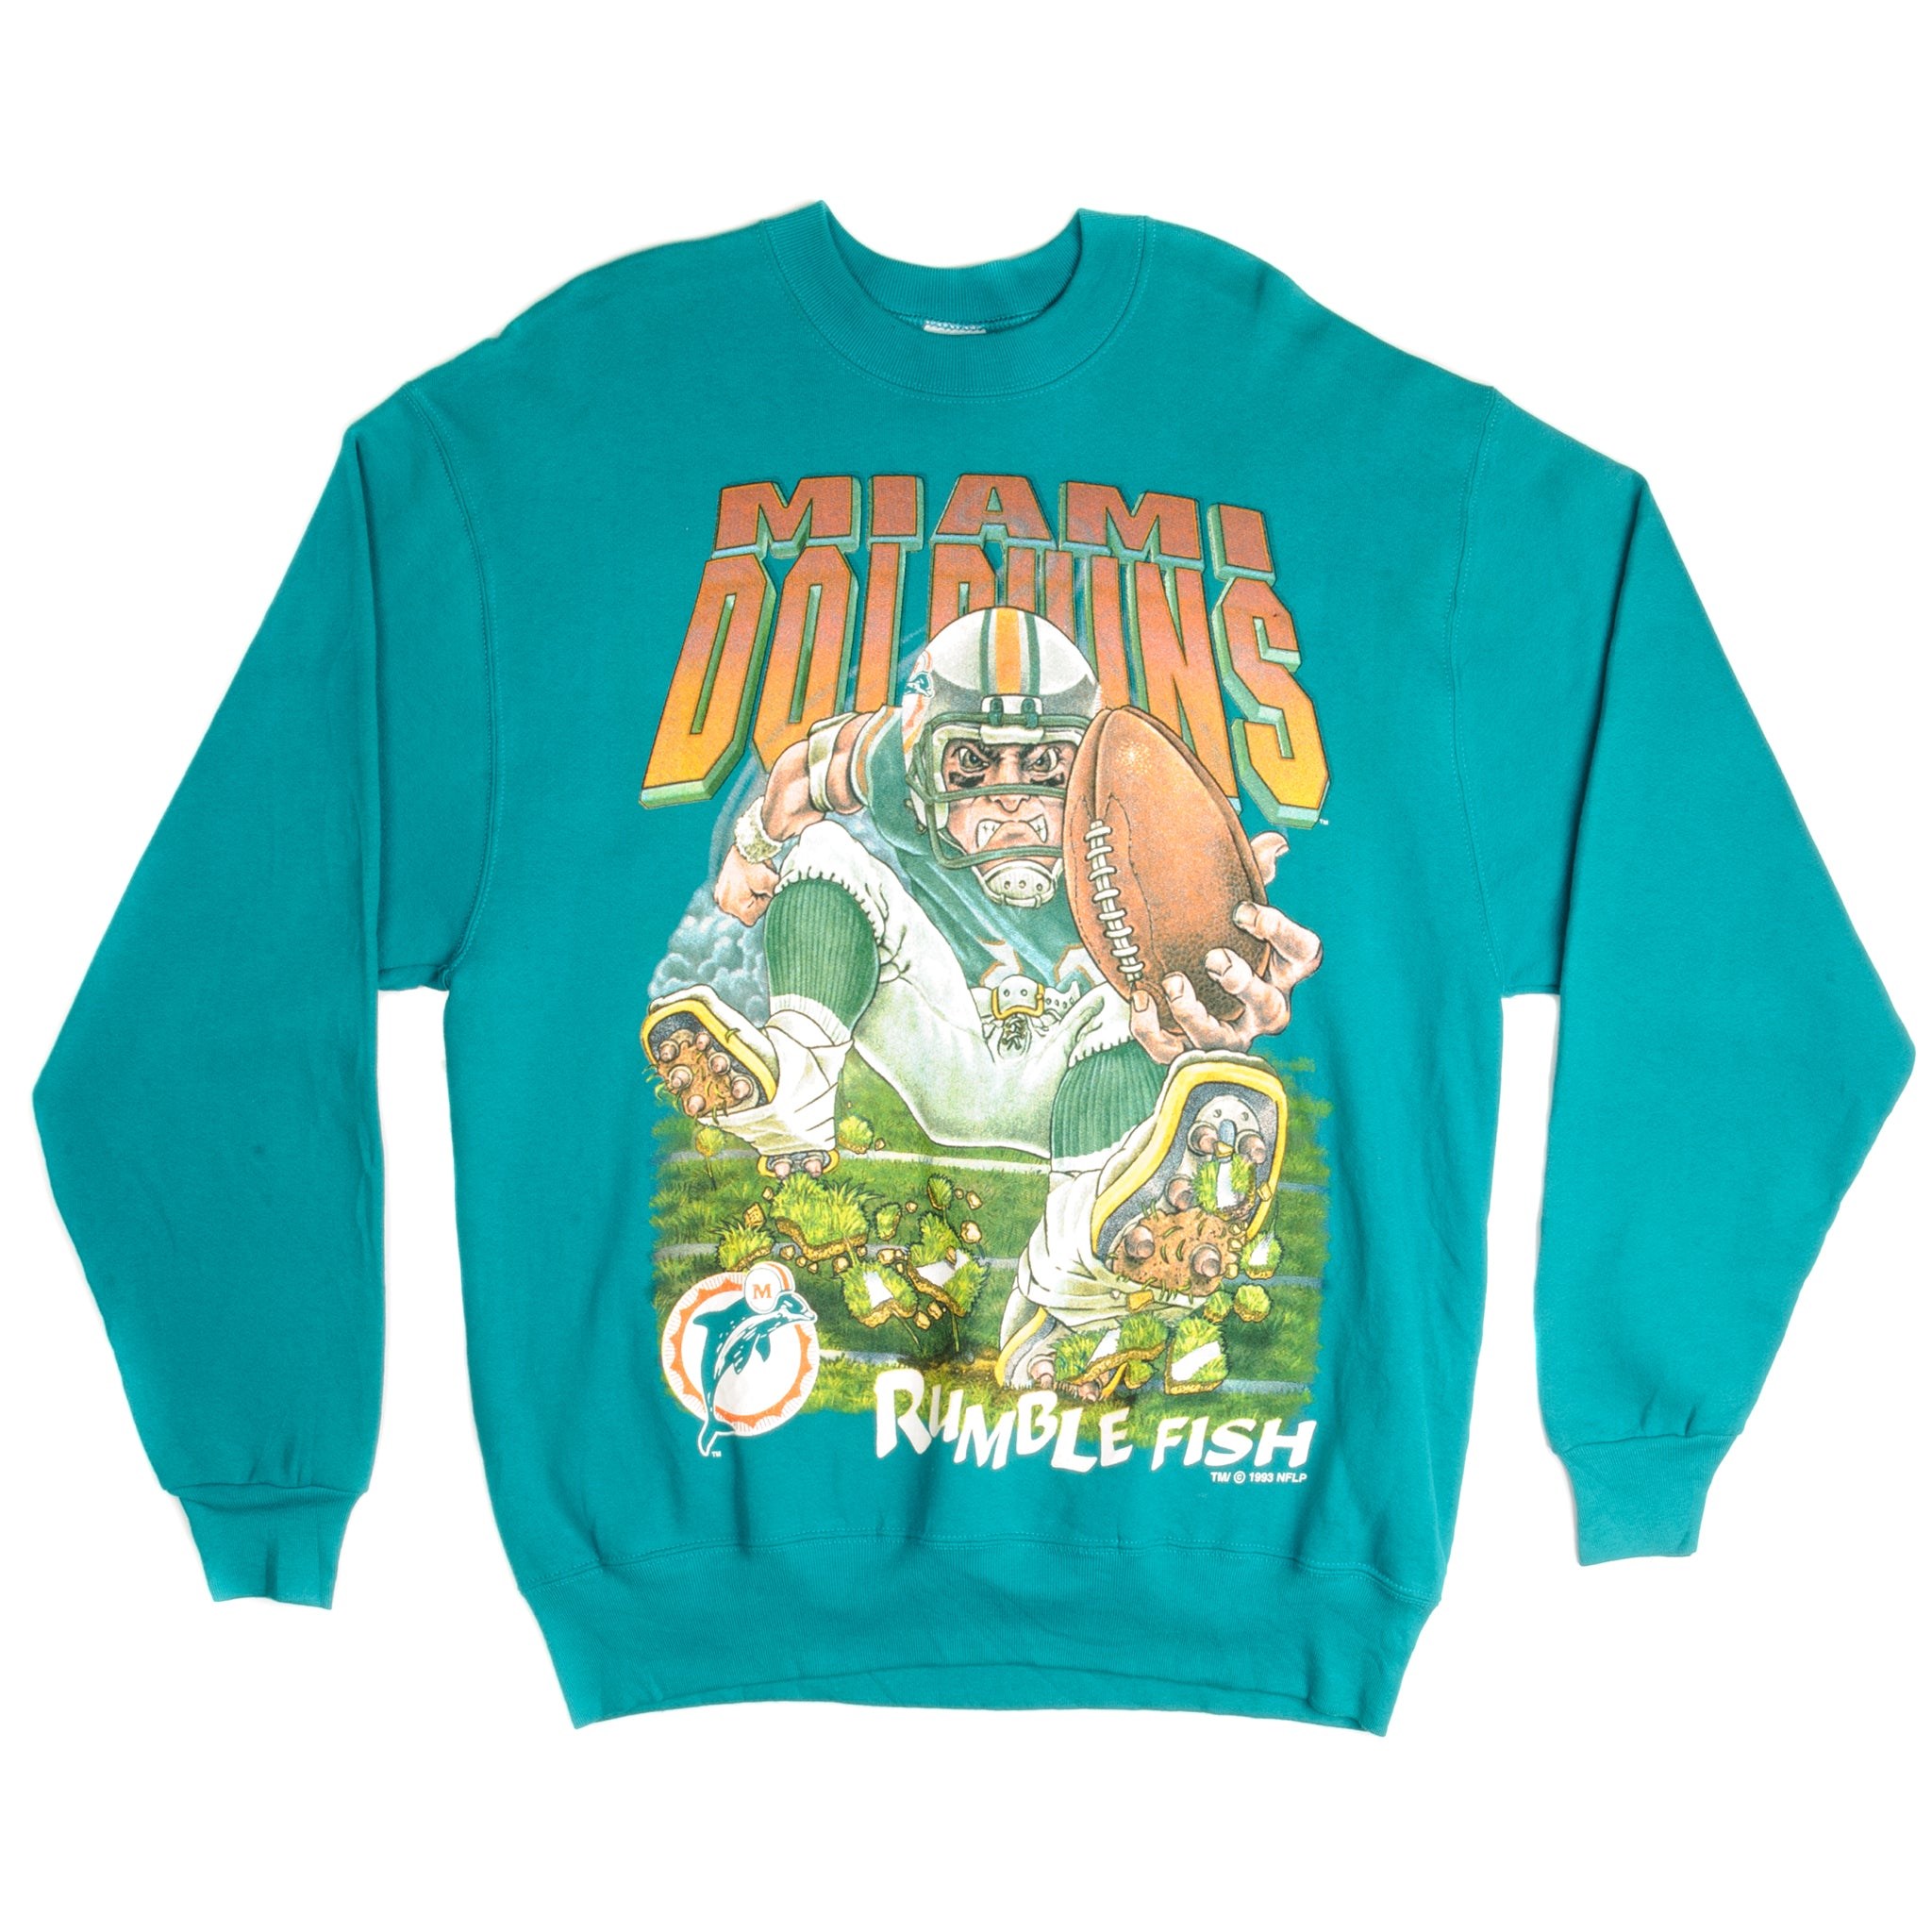 Vintage NFL Miami Dolphins Sweatshirt 1993 Size XL Made in USA